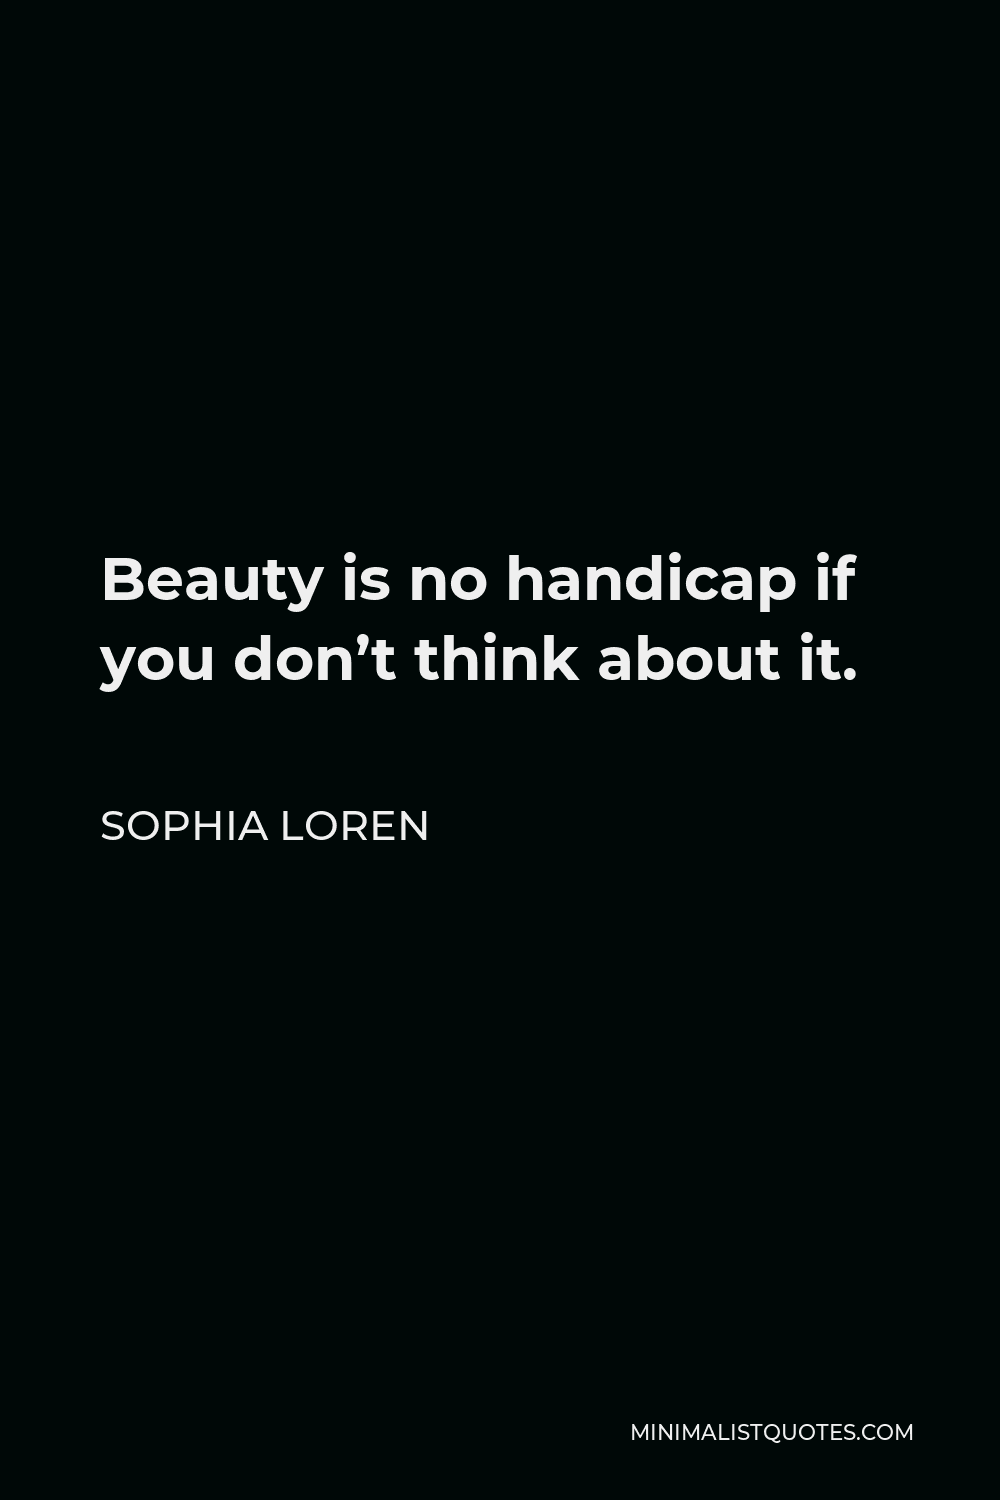 Sophia Loren Quote - Beauty is no handicap if you don’t think about it.